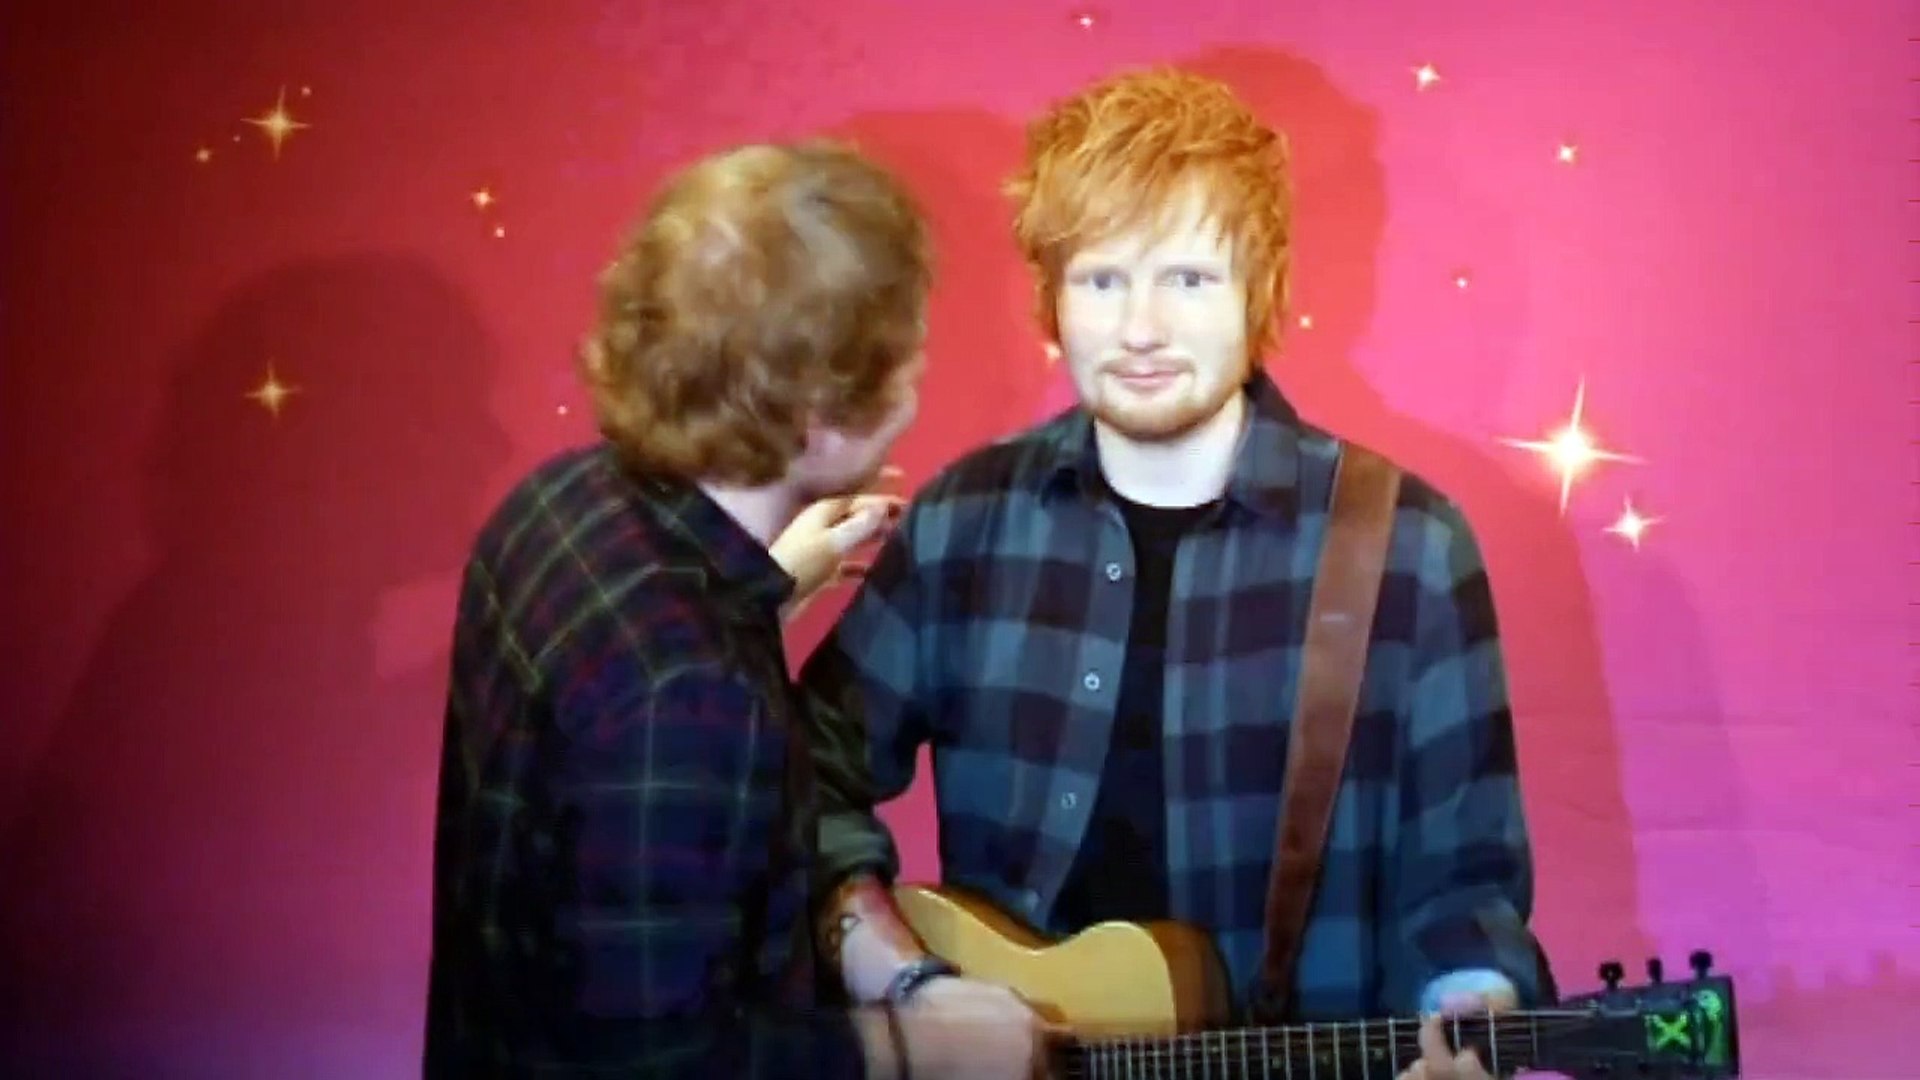 Ed Sheeran takes a selfie with his wax double